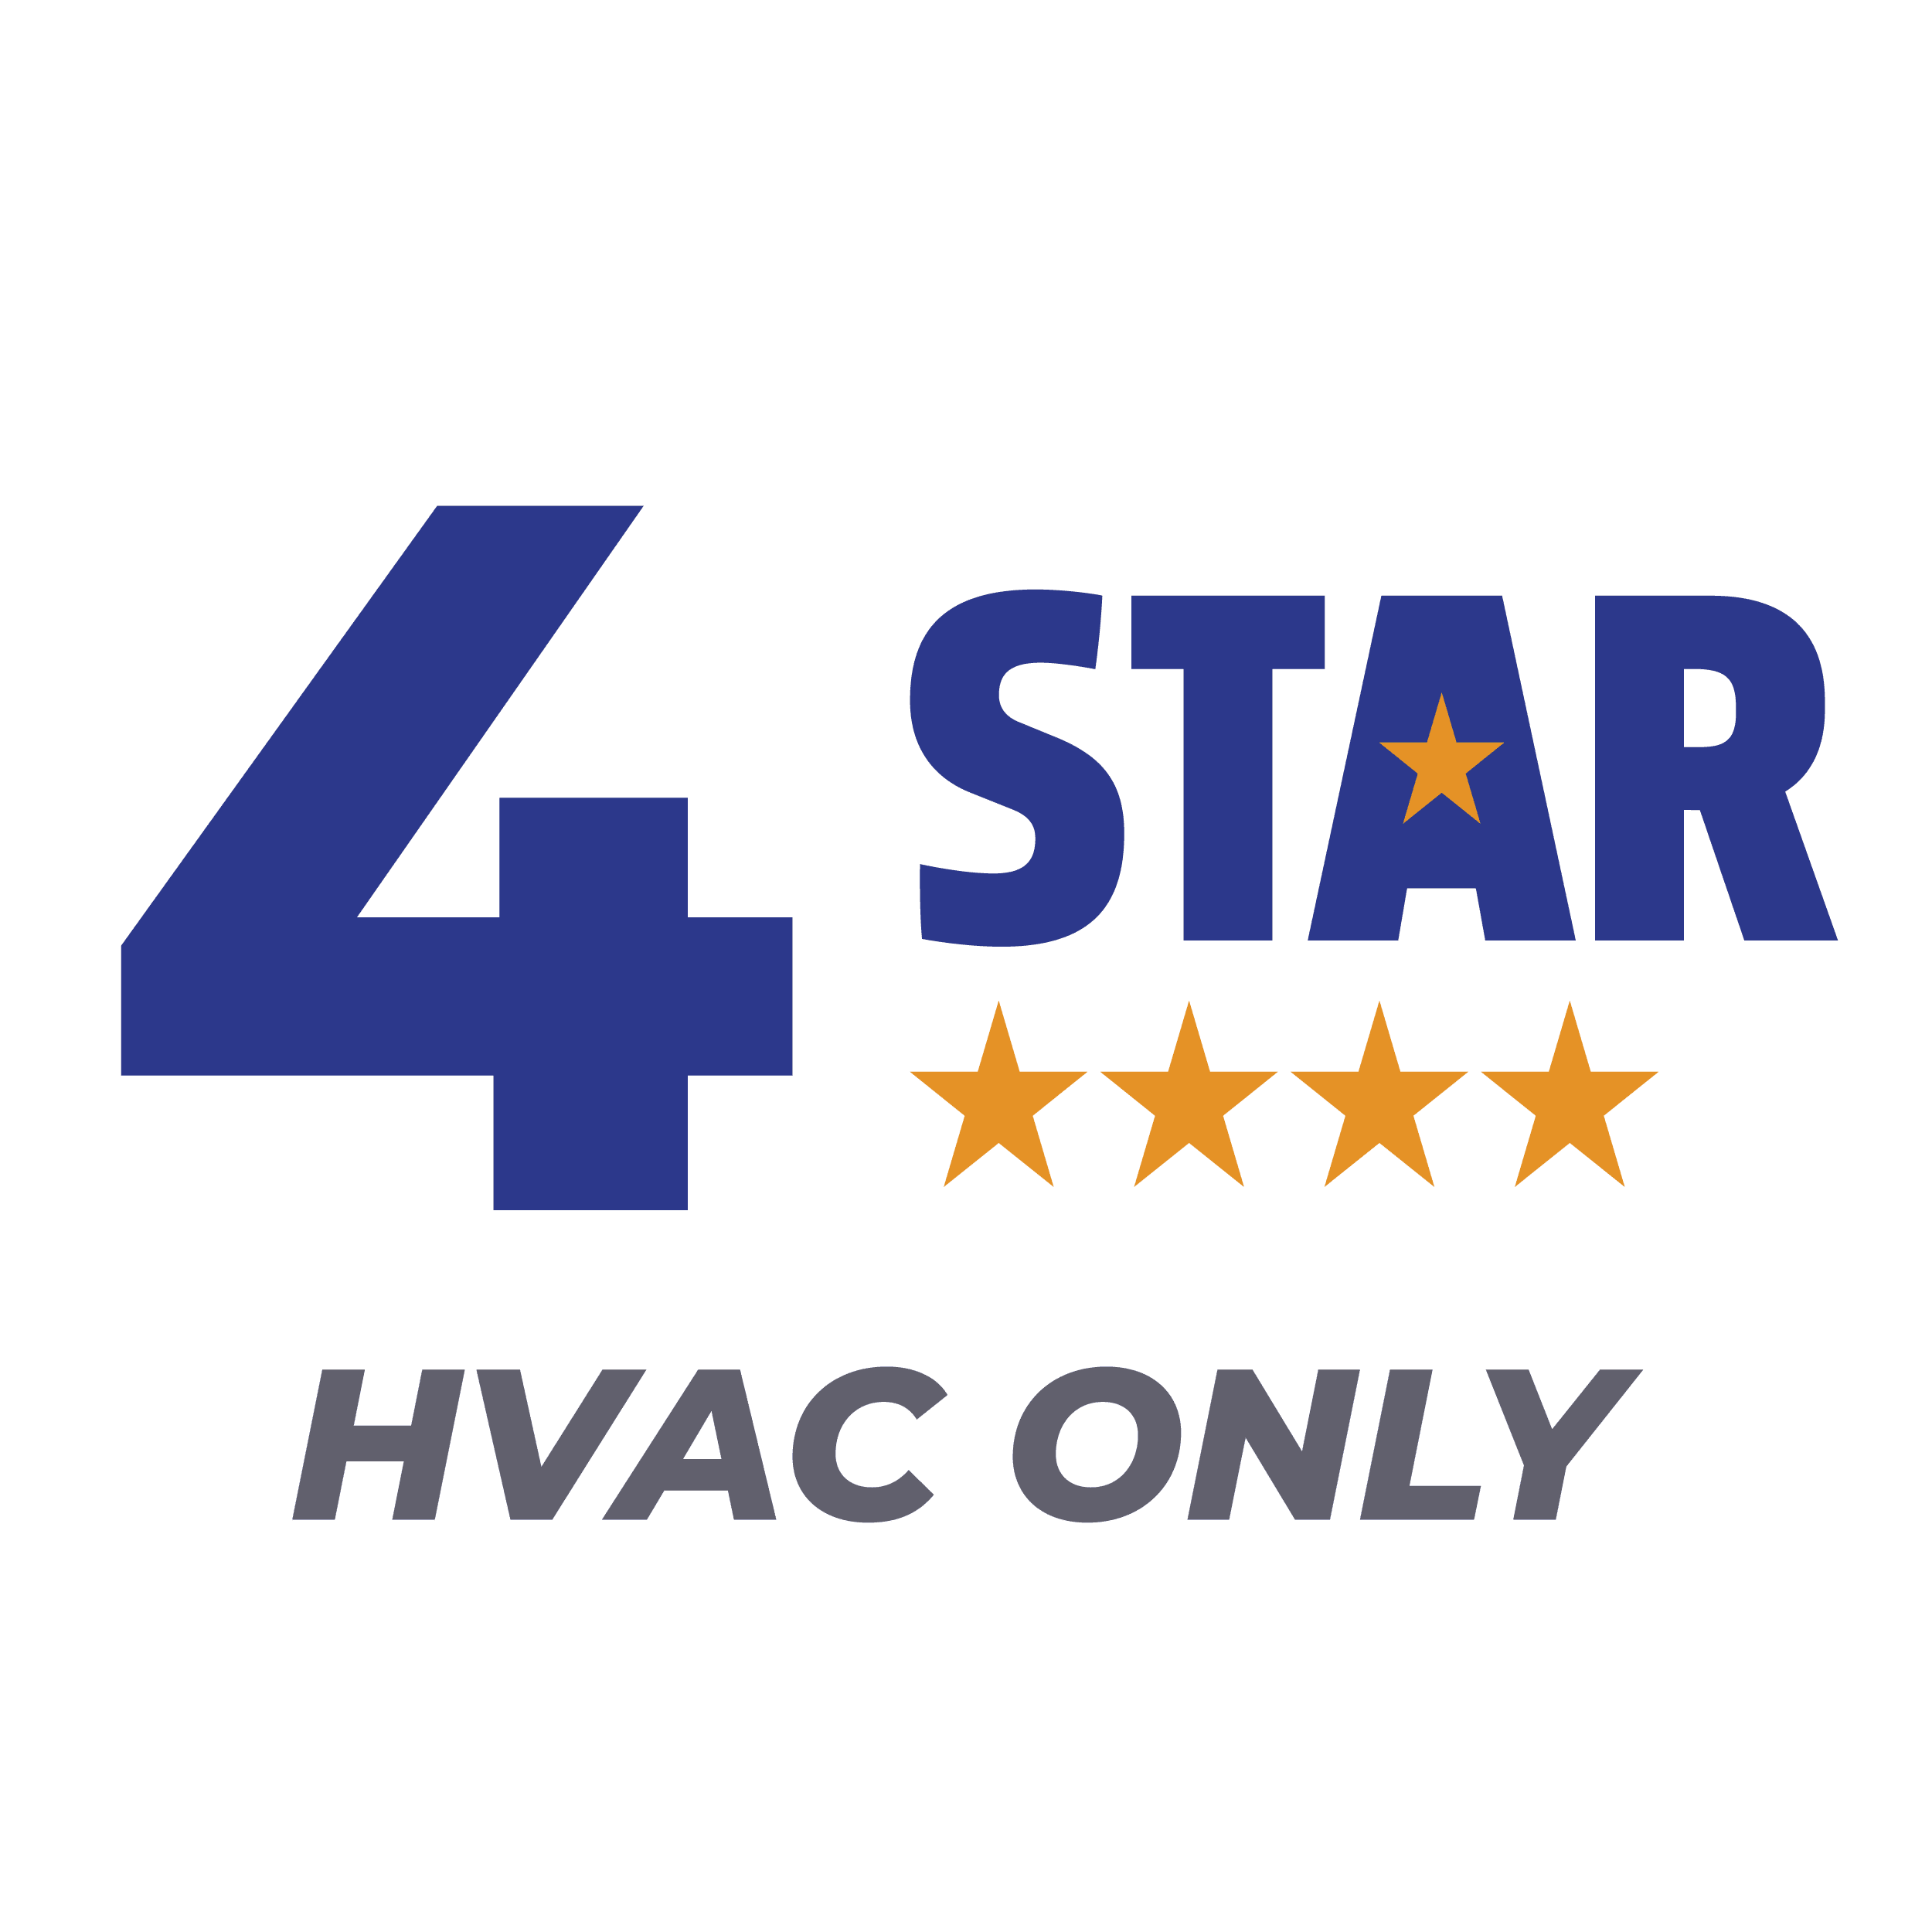 Five Star Protect Plans